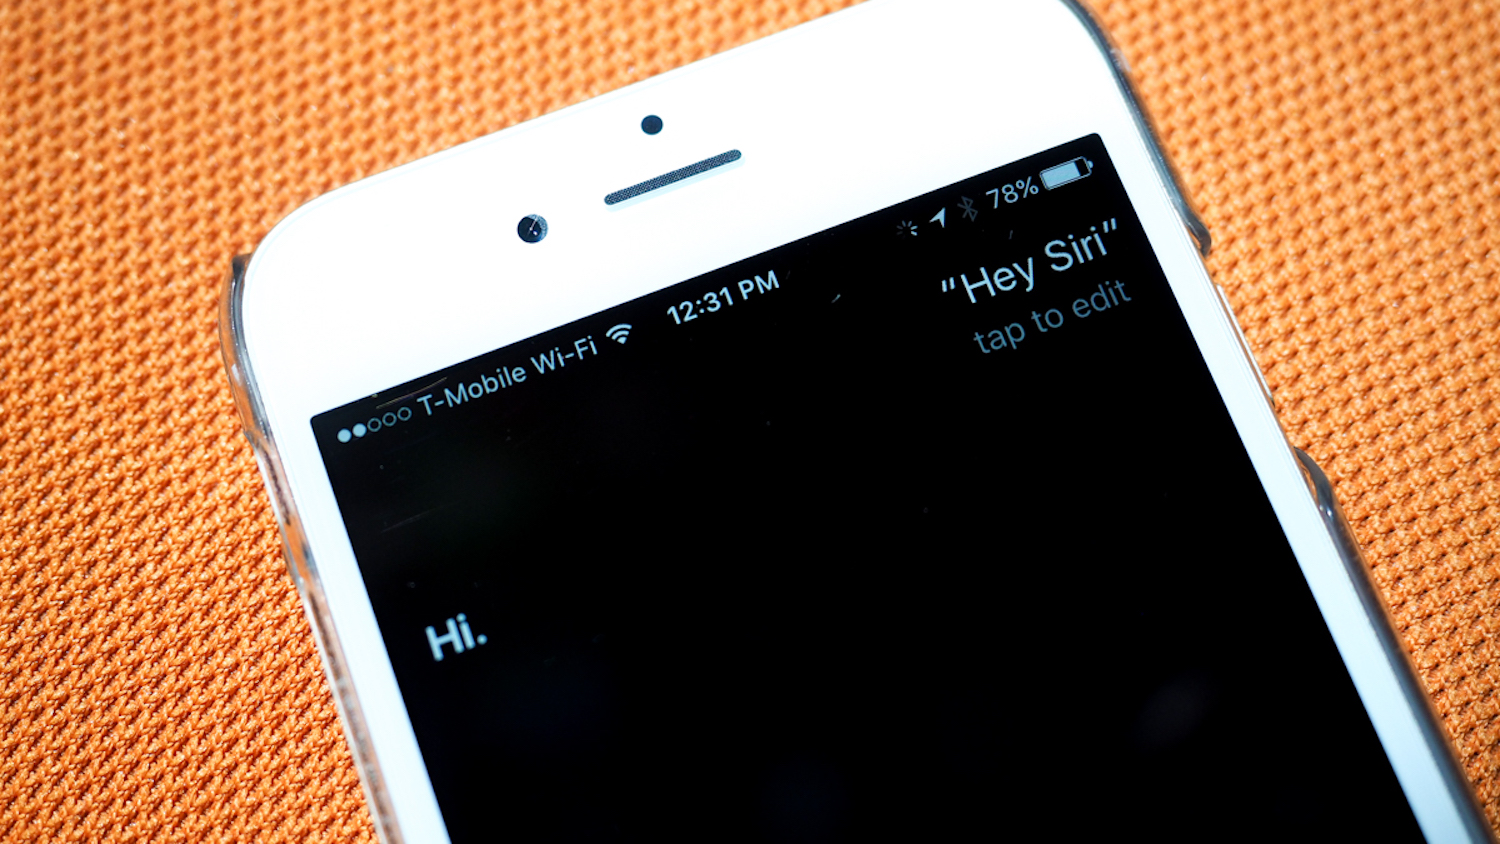 'Hello Siri': how to set up, enable, use 